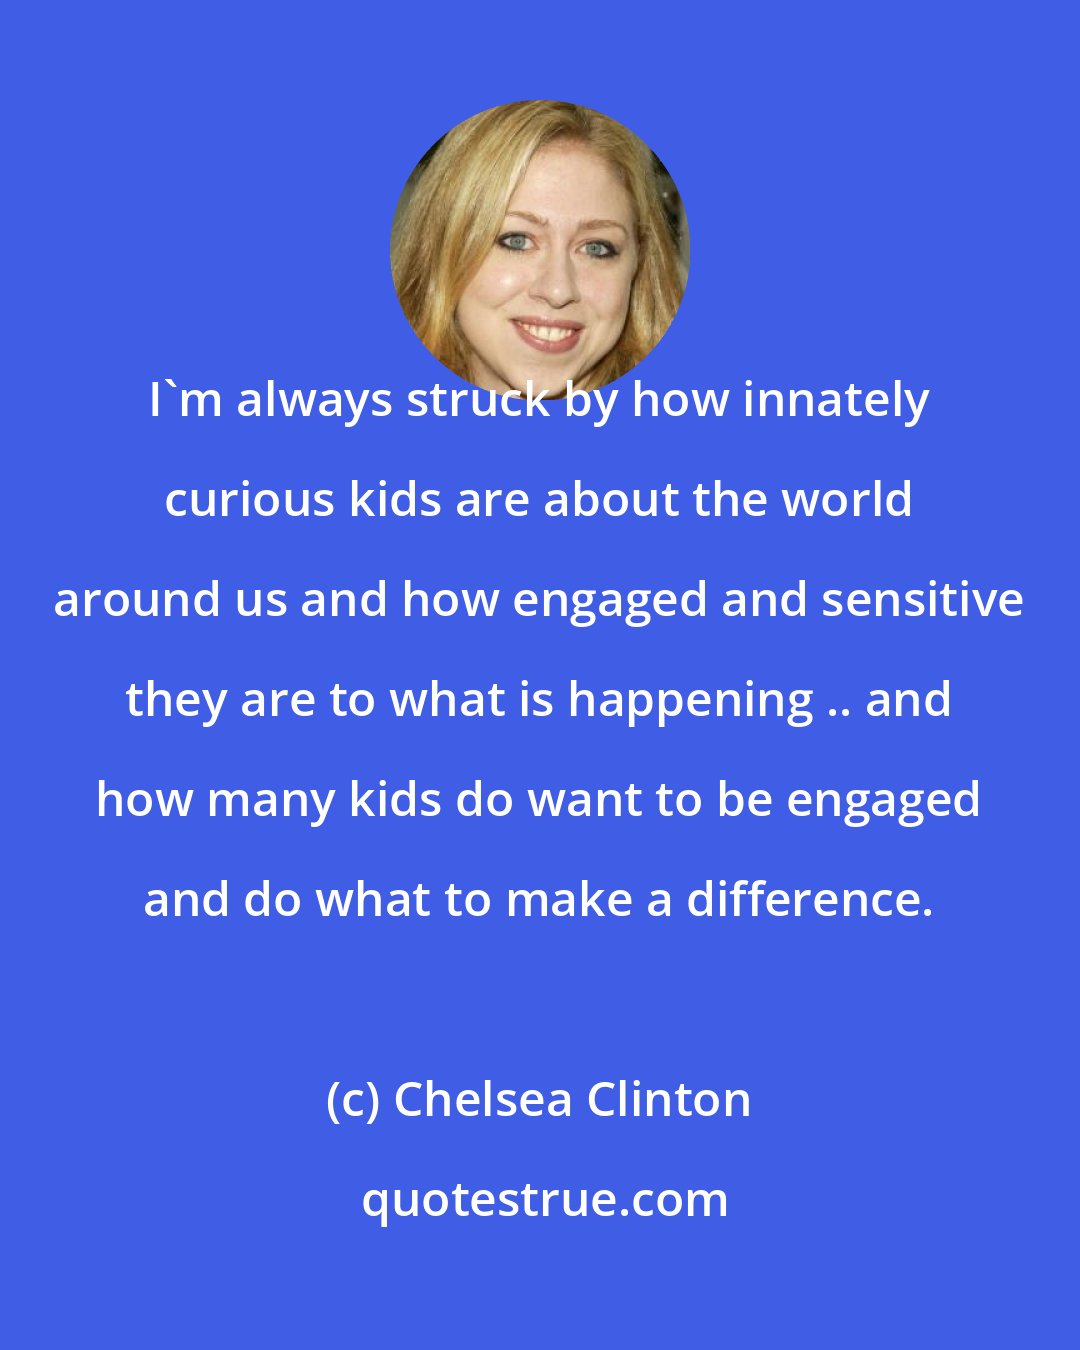 Chelsea Clinton: I'm always struck by how innately curious kids are about the world around us and how engaged and sensitive they are to what is happening .. and how many kids do want to be engaged and do what to make a difference.